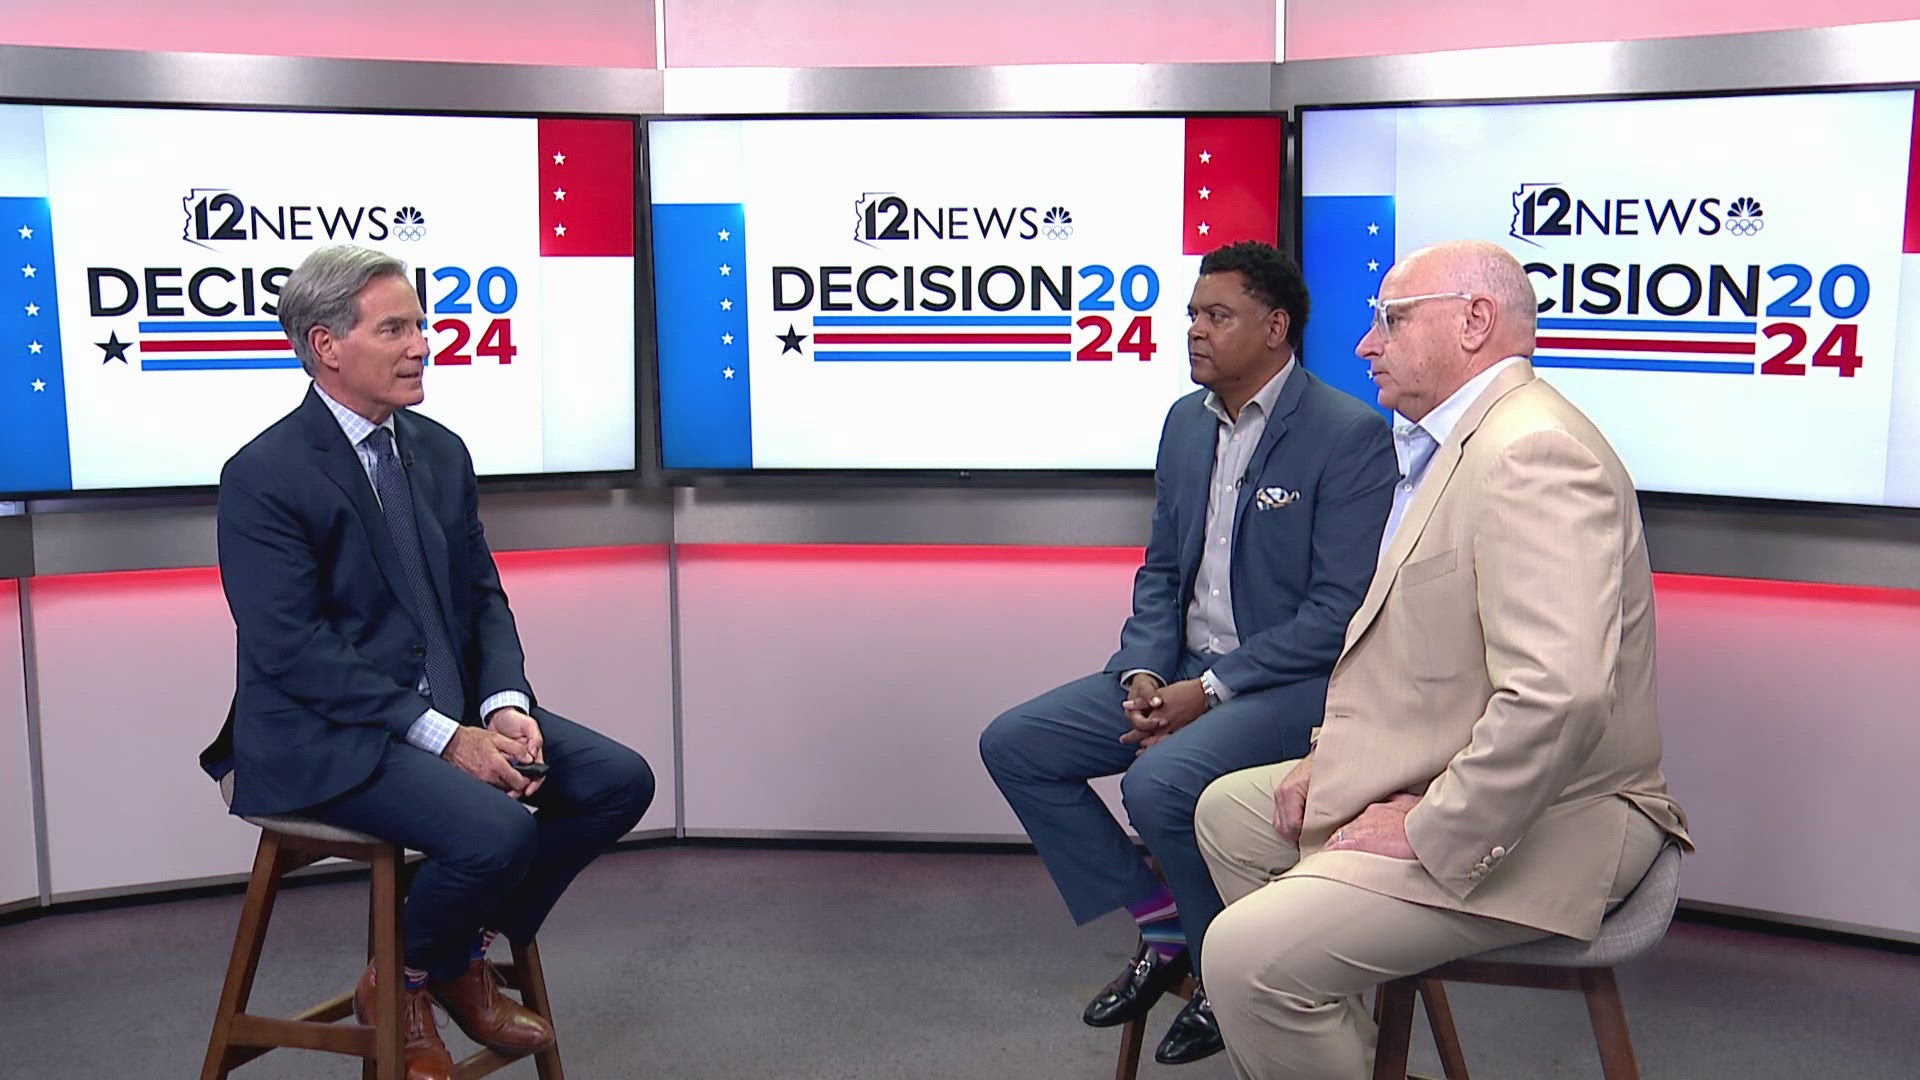 Growing concern and call-outs led to Biden's sit-down with ABC on Friday. Political analysts Karl Gentles and Chuck Coughlin join us in studio for perspective.